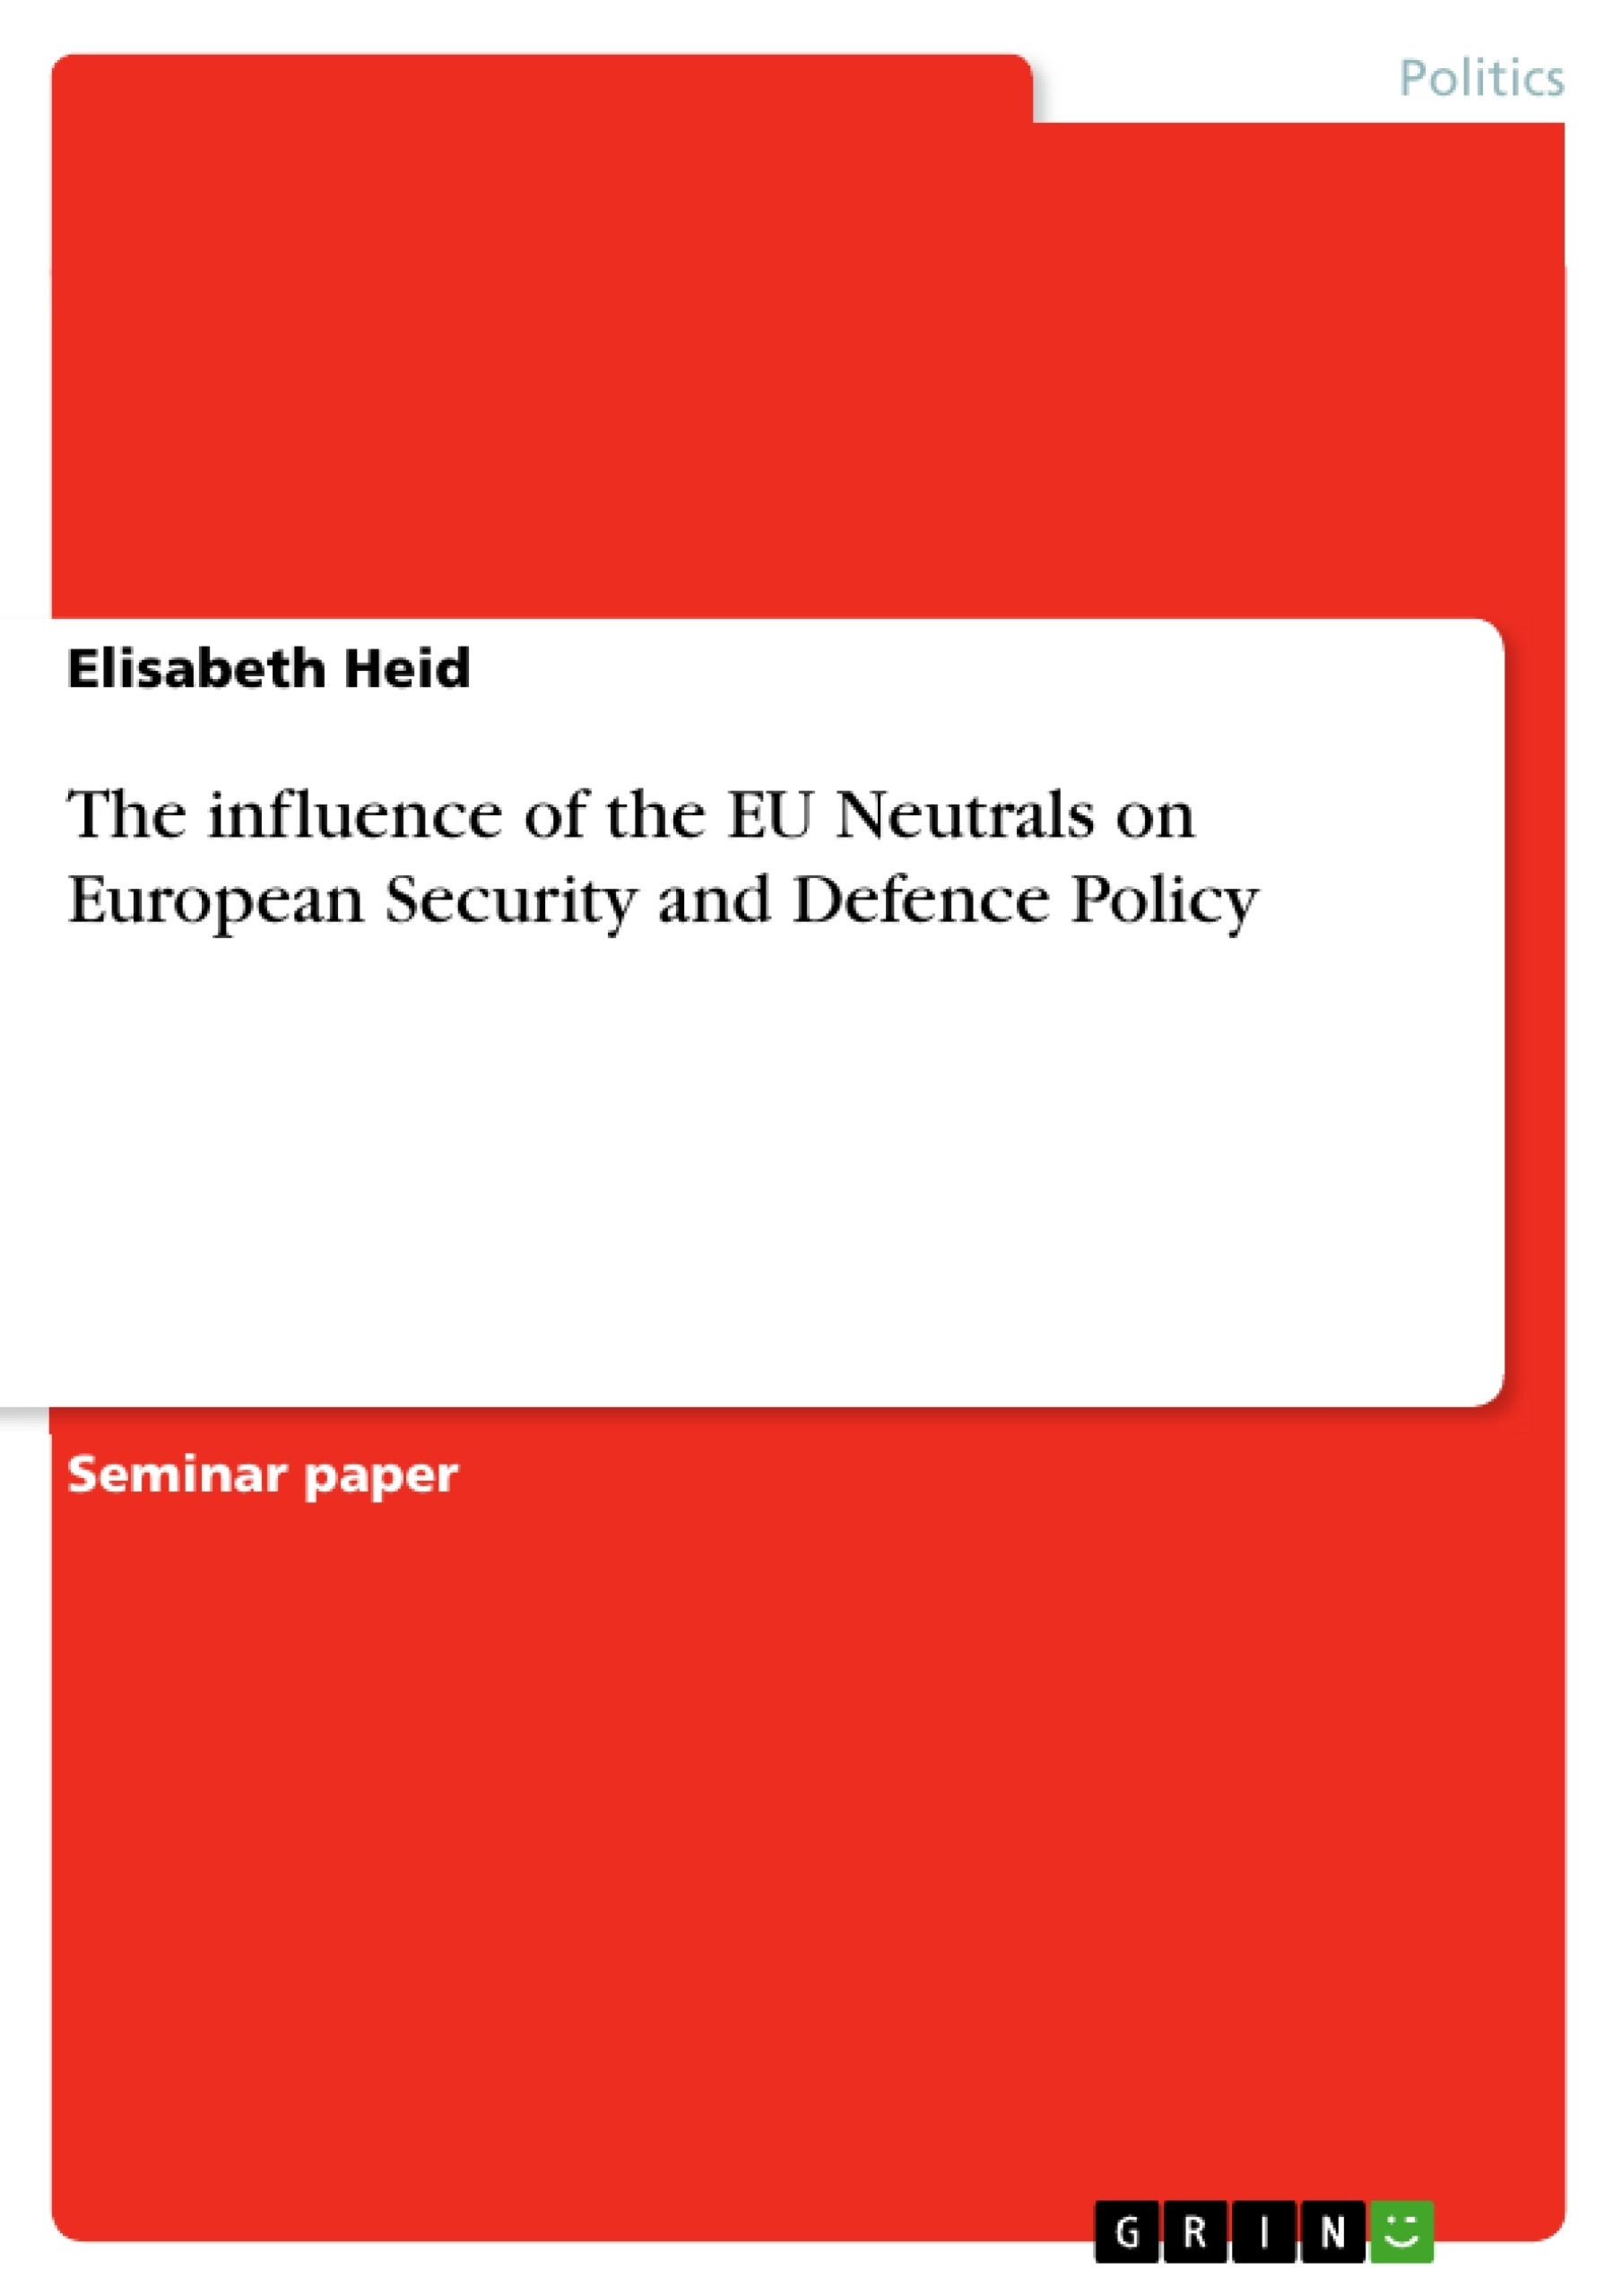 Titel: The influence of the EU Neutrals on European Security and Defence Policy